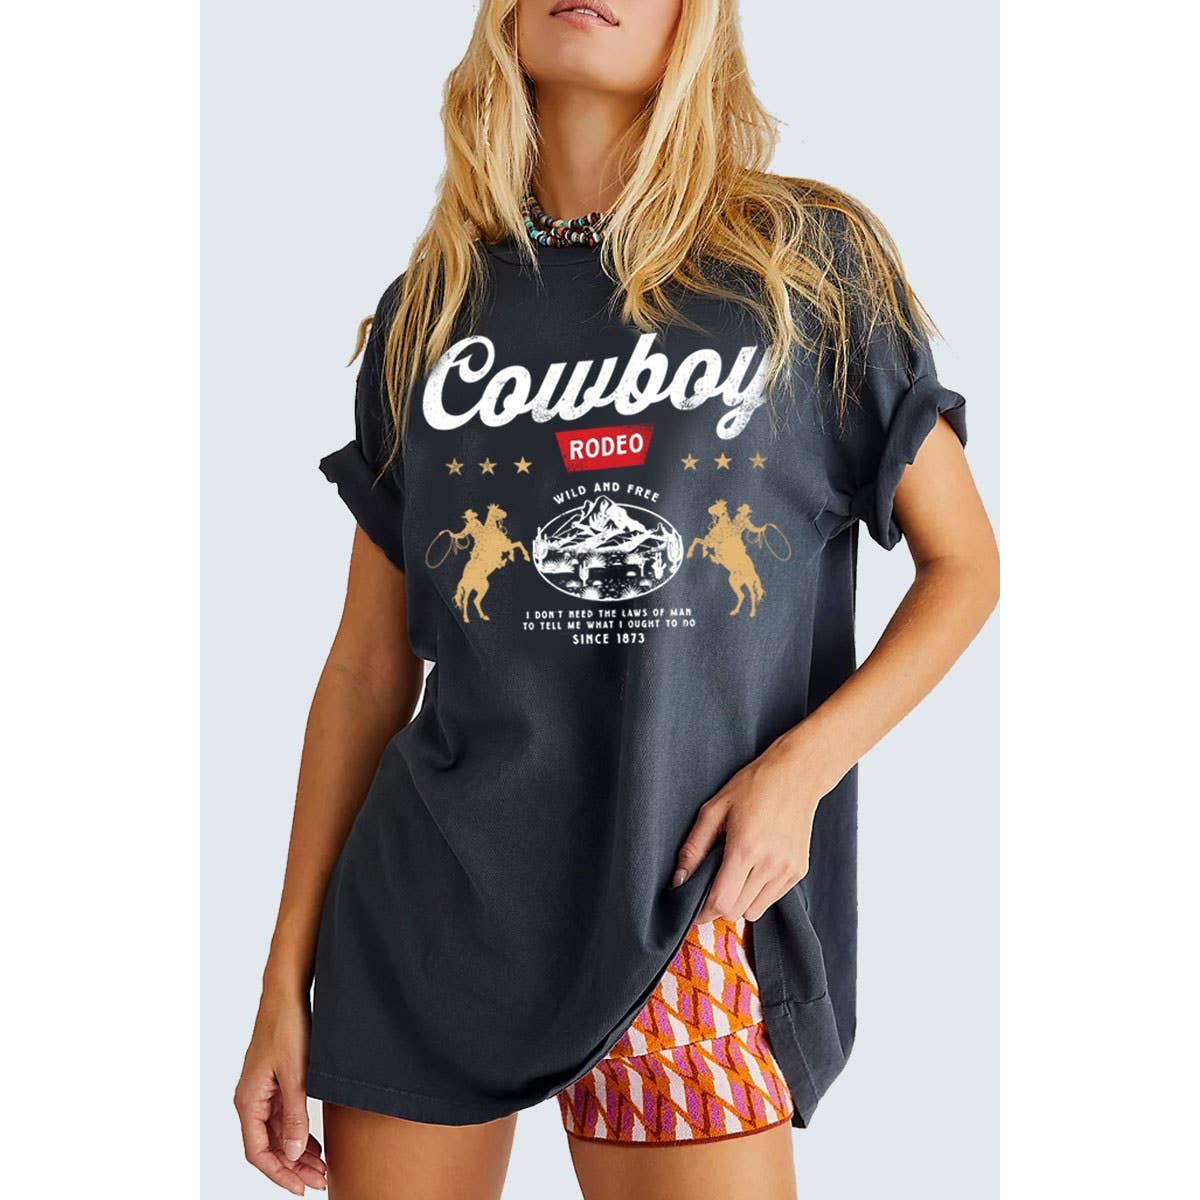 COWBOY RODEO OVERSIZED GRAPHIC TEE